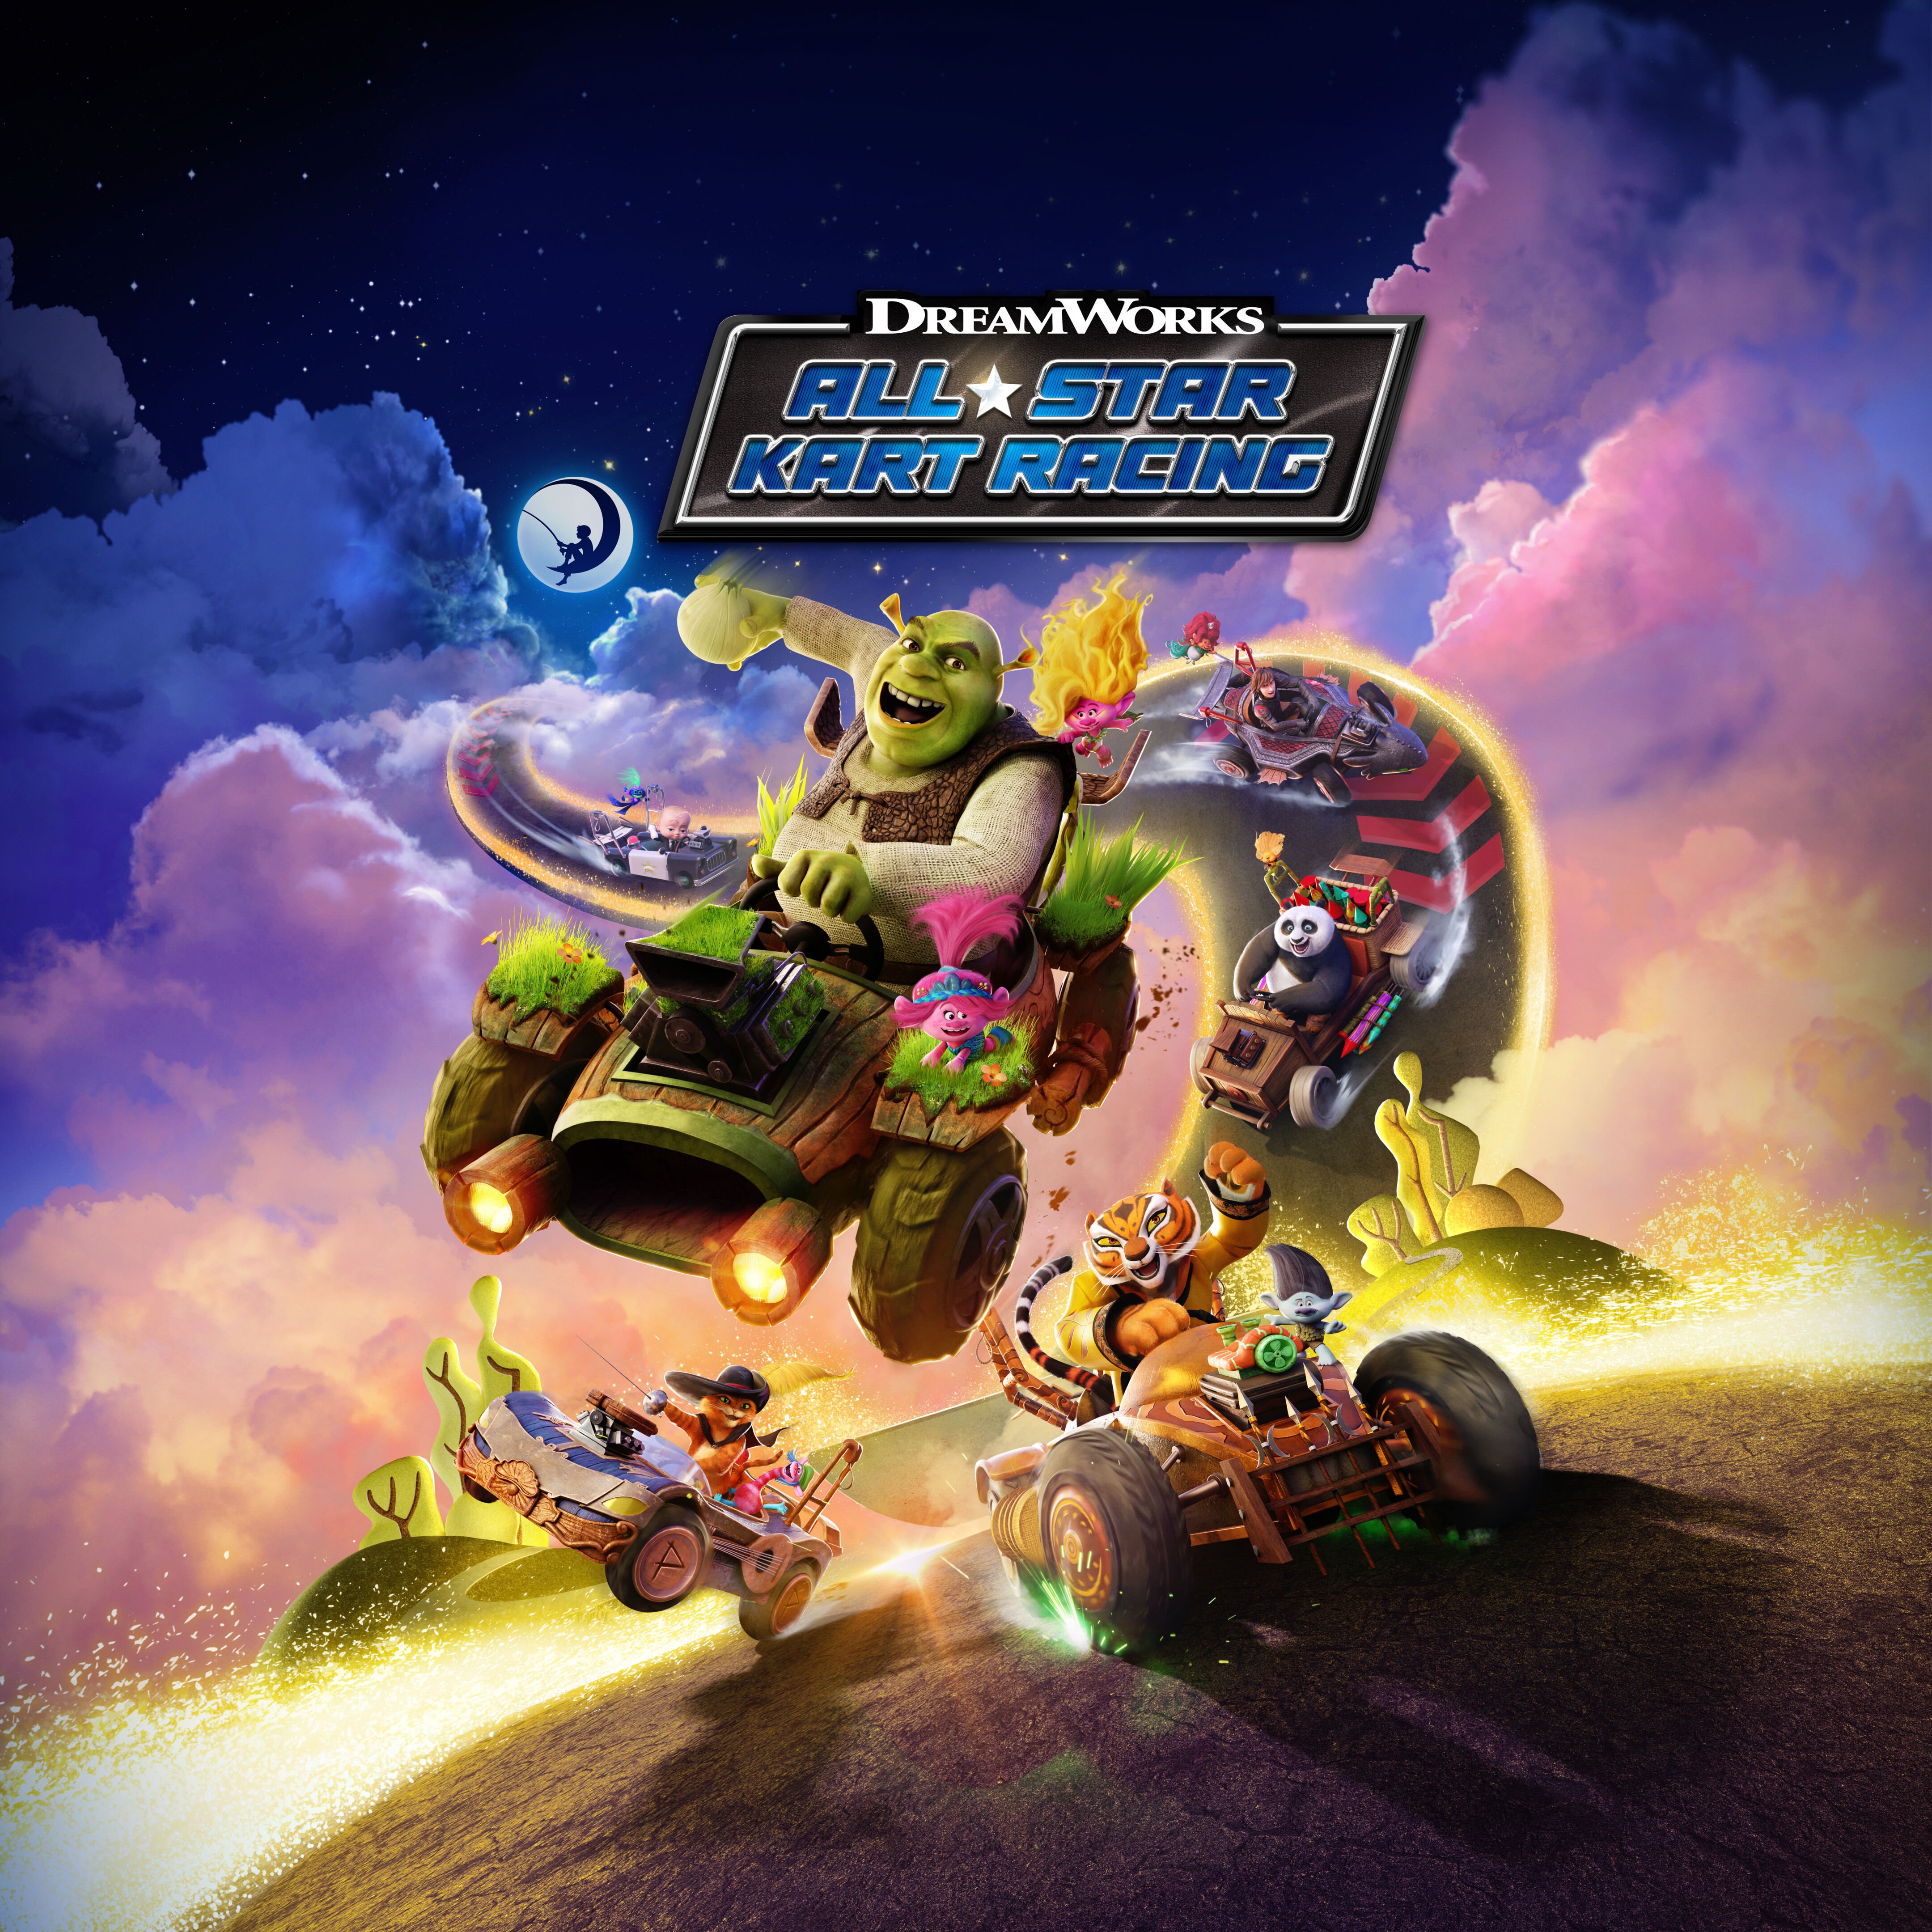 DreamWorks All-Star Kart Racing announced for PS5, Xbox Series, PS4, Xbox One, Switch, and PC